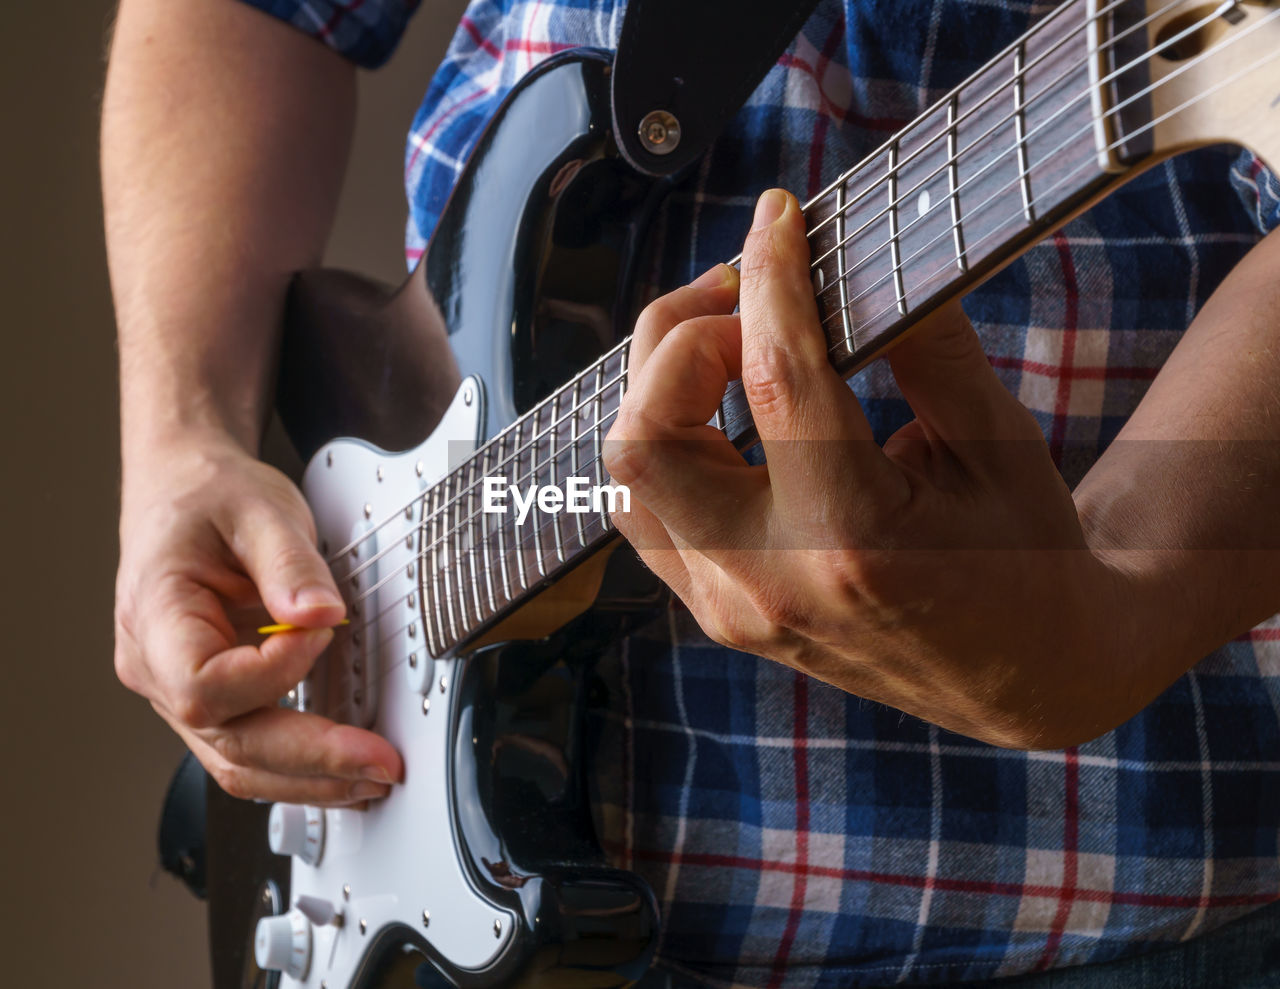 MIDSECTION OF MAN PLAYING GUITAR IN OFFICE